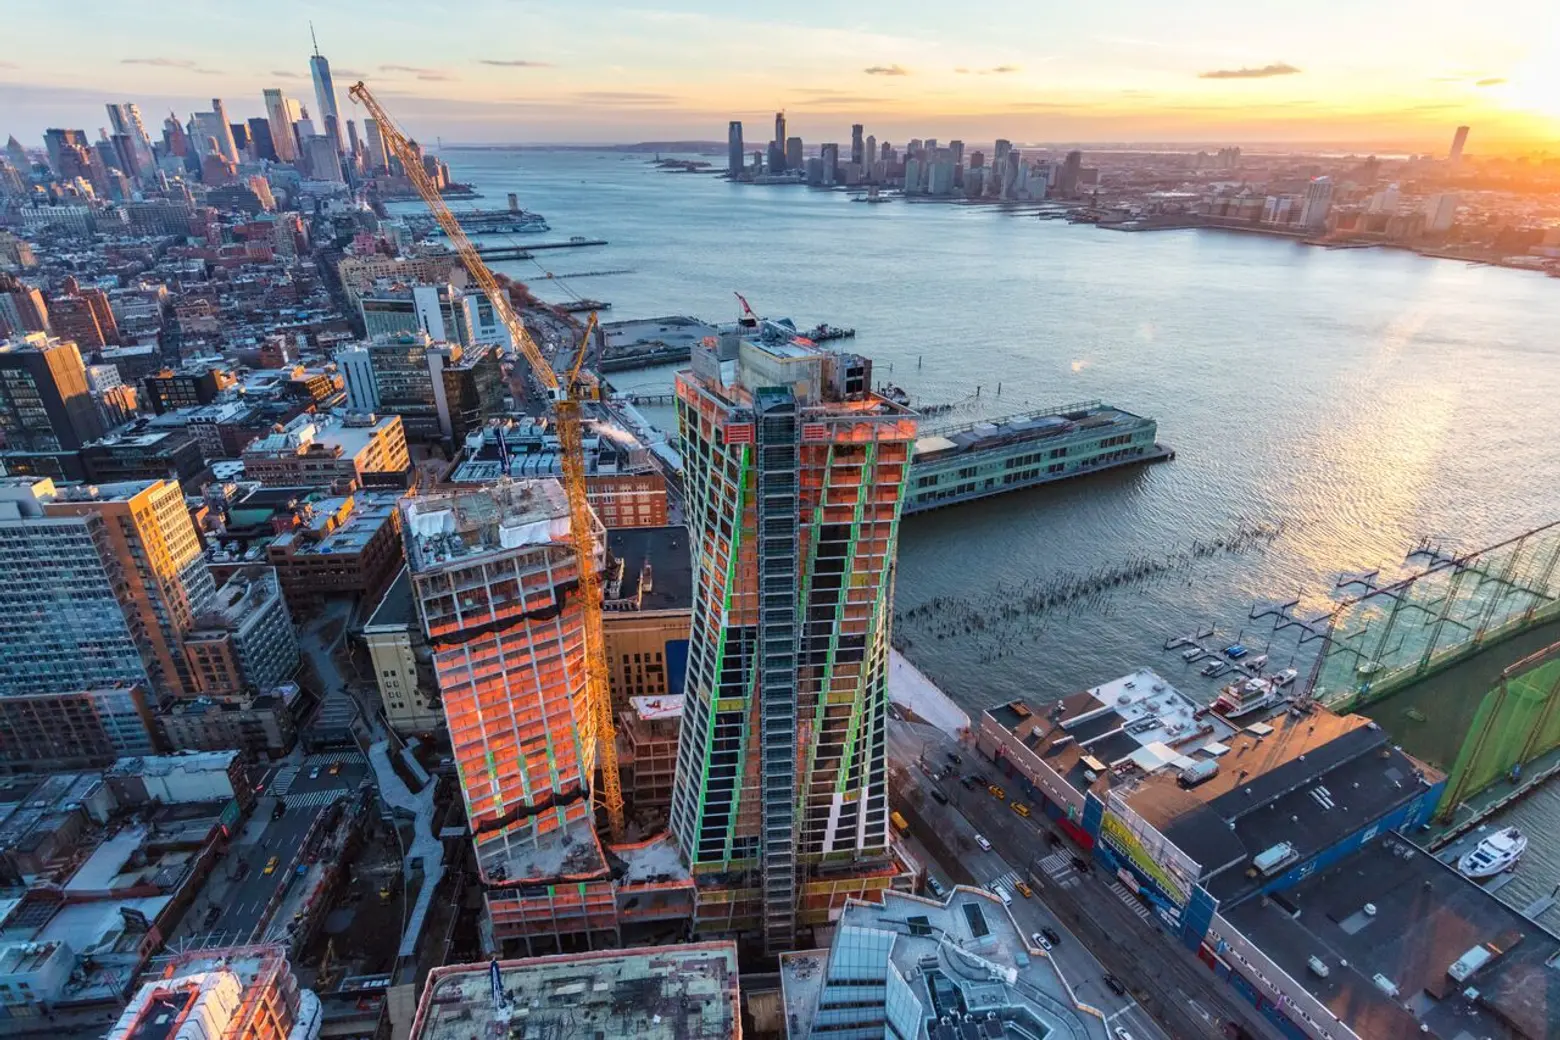 Bjarke Ingels’ two twisting towers top out in Chelsea